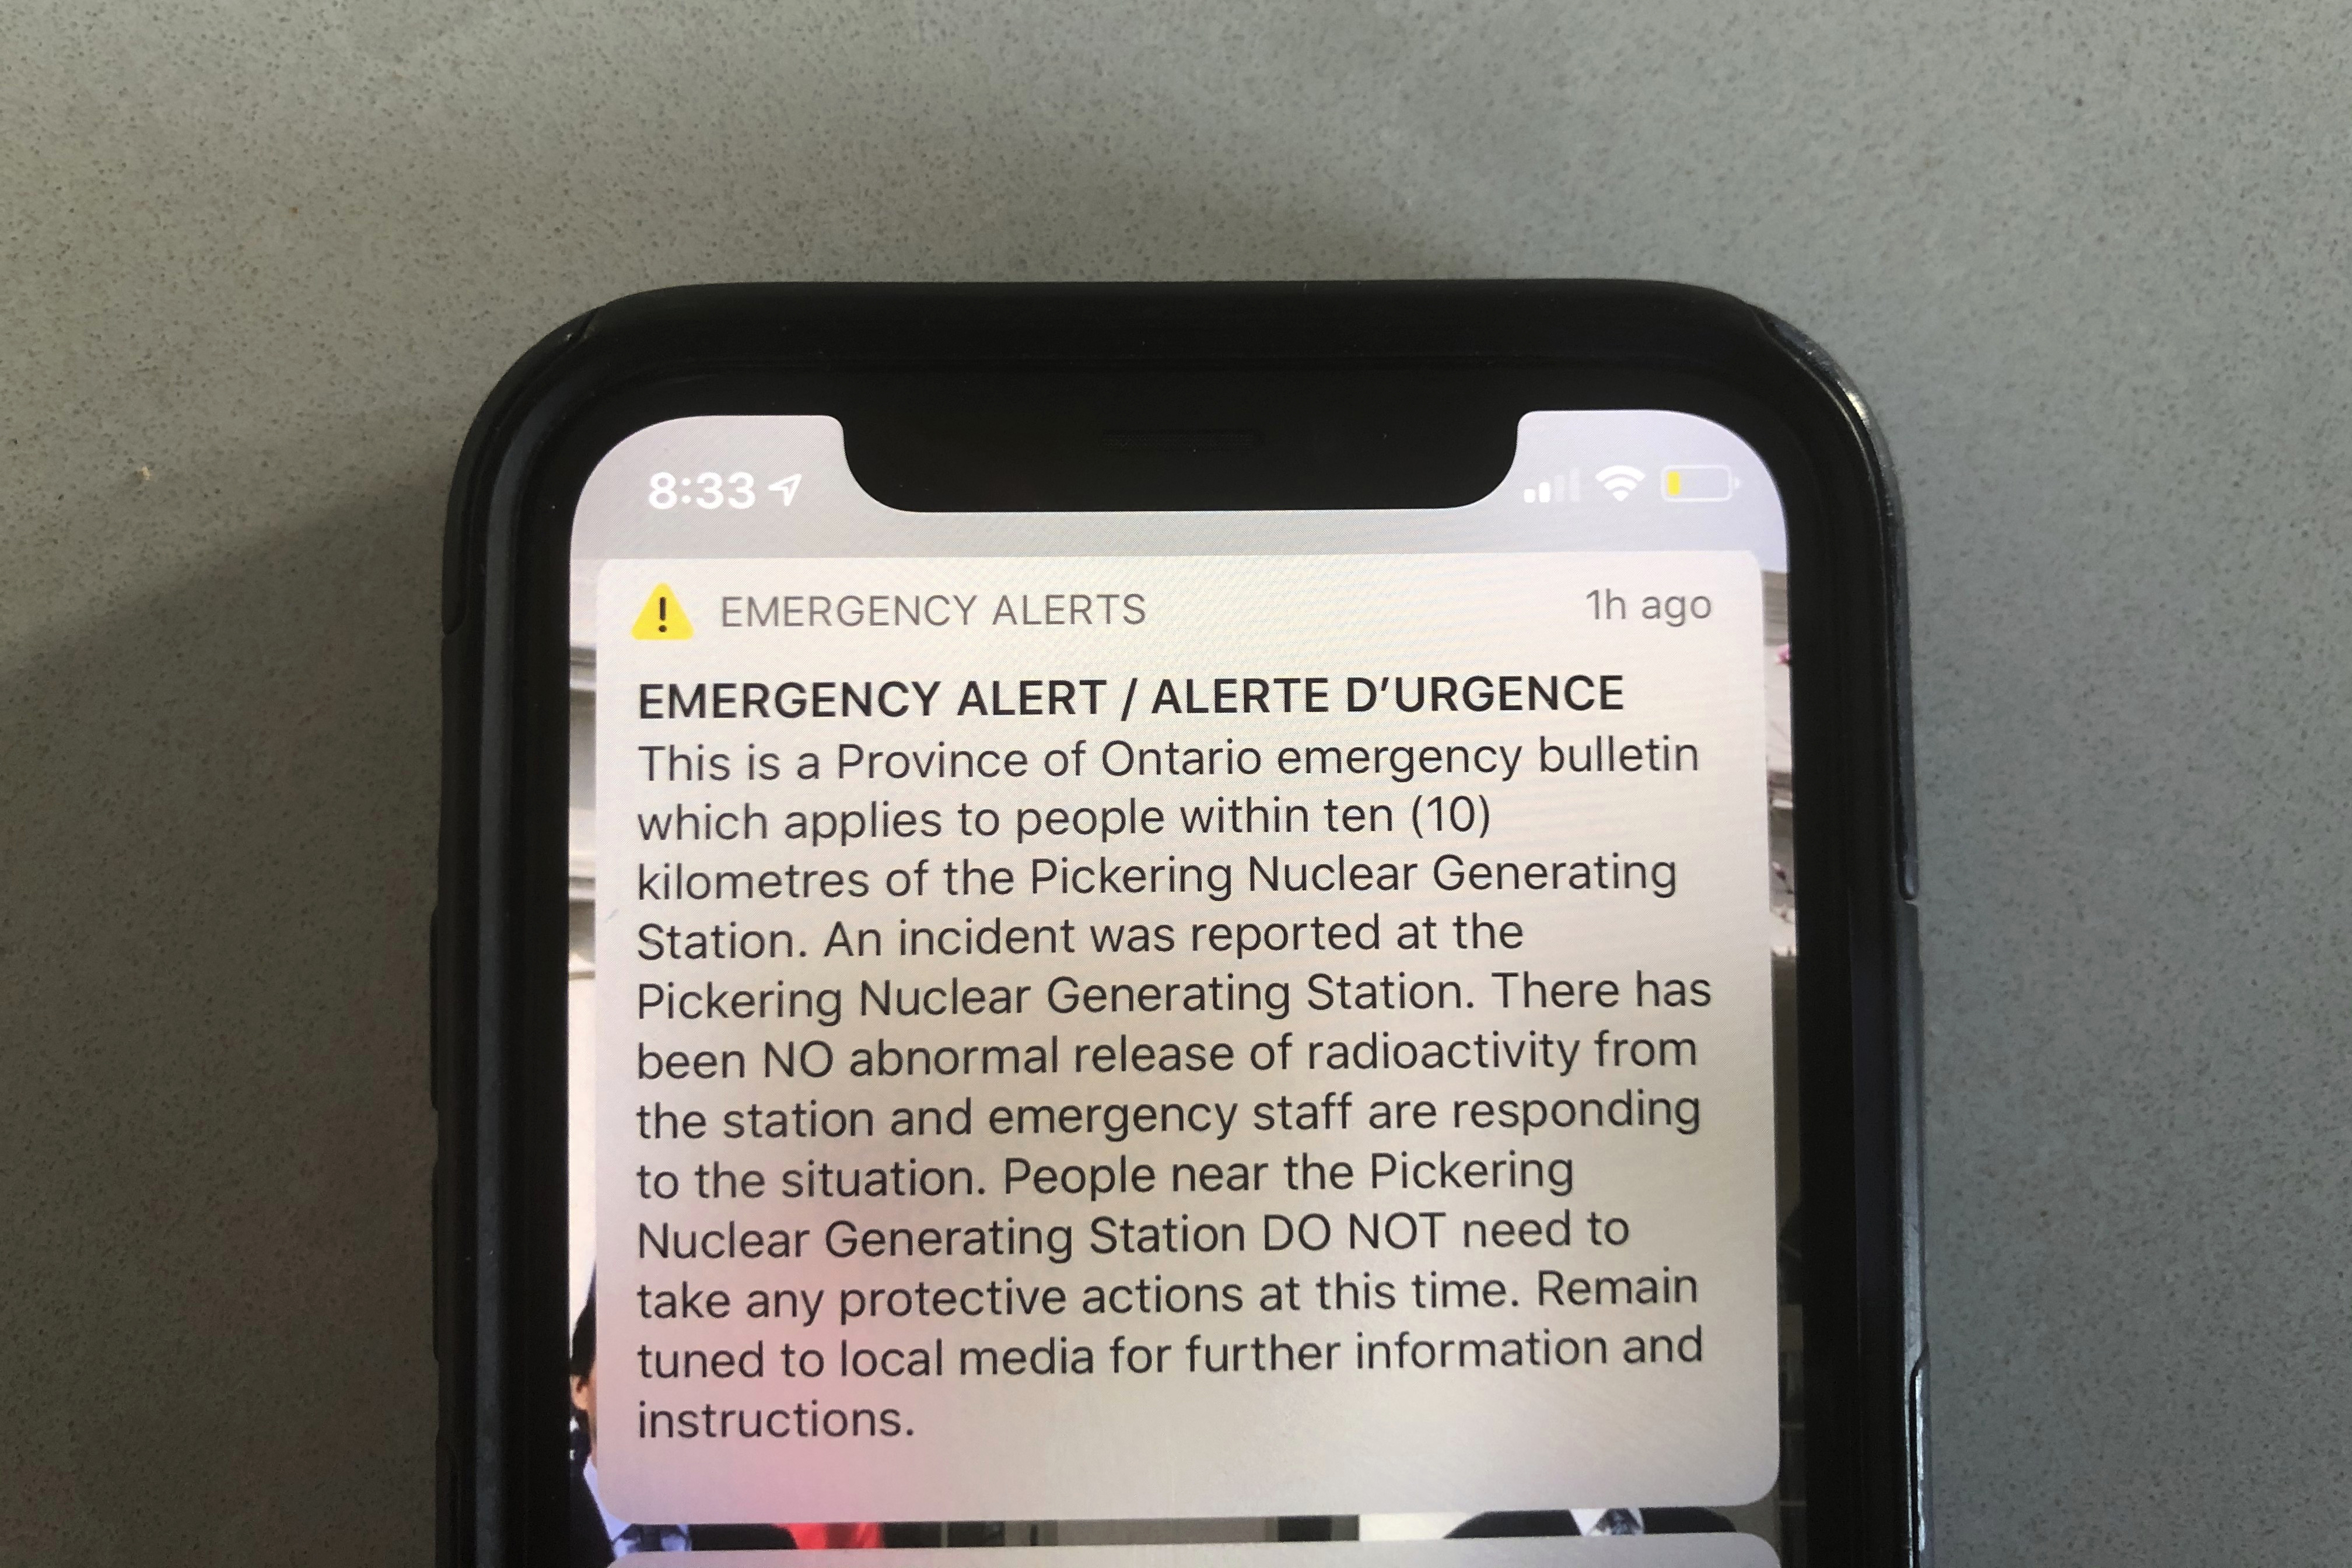 An emergency alert issued by the Canadian province of Ontario reporting an unspecified "incident" at a nuclear plant is shown on a smartphone. Ontario Power Generation later sent a message saying the alert was sent in error. The initial message said the incident had occurred at the Pickering Nuclear Generating Station, though it added there had been no abnormal release of radioactivity from the station.